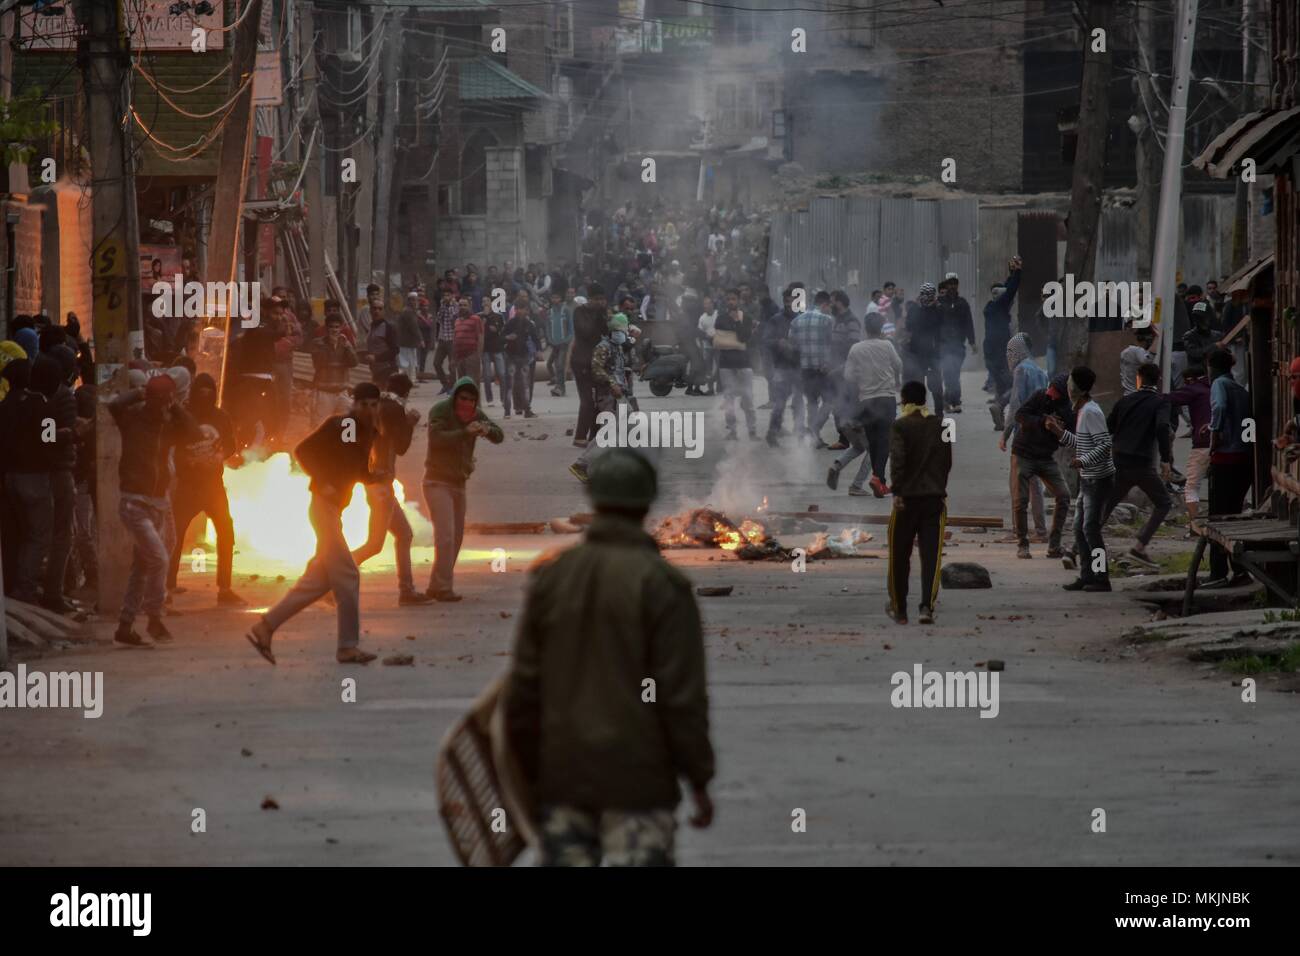 May 8, 2018 - Srinagar, J&K, India - A tear gas shell explodes near Kashmiri protesters during clashes in Srinagar, Indian administered Kashmir. Fierce clashes broke out between government forces and Kashmiri protesters in Srinagar on Tuesday as the valley continued to remain tense over the killing of 11 people including 5 militants and 6 civilians in Indian administered Kashmir. Police used tear smoke shells and shot gun pellets to disperse hundreds of demonstrators who hurled rocks and chanted anti-Indian and pro-freedom slogans. Credit: Saqib Majeed/SOPA Images/ZUMA Wire/Alamy Live News Stock Photo